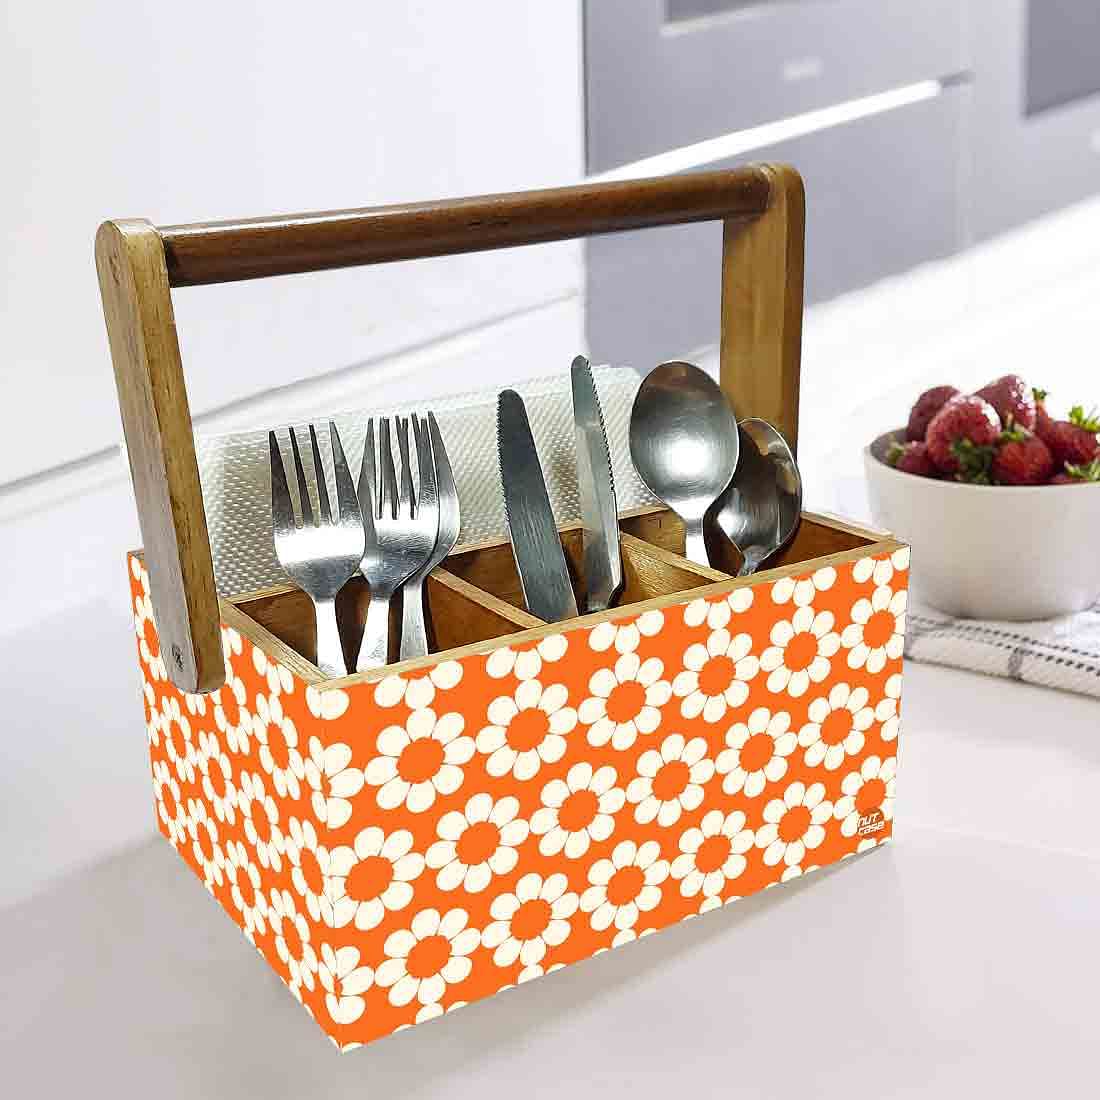 Cutlery Stand for kitchen Big Size Holder With Handle - Orange Flower Nutcase